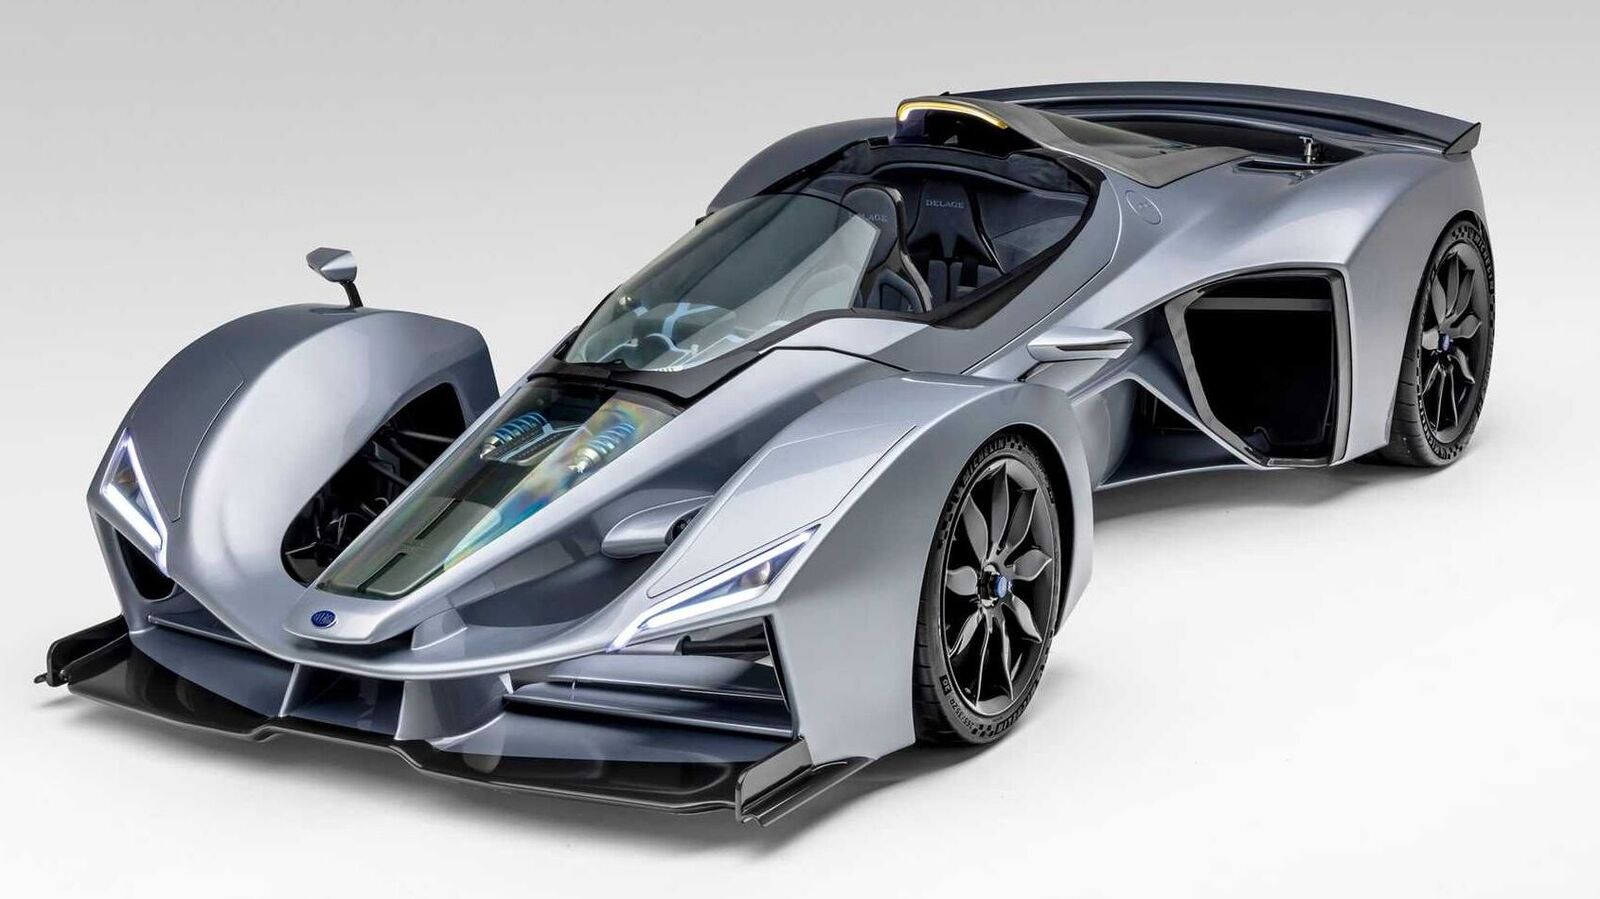 This hybrid hypercar is influenced by both F1 racer and fighter jet